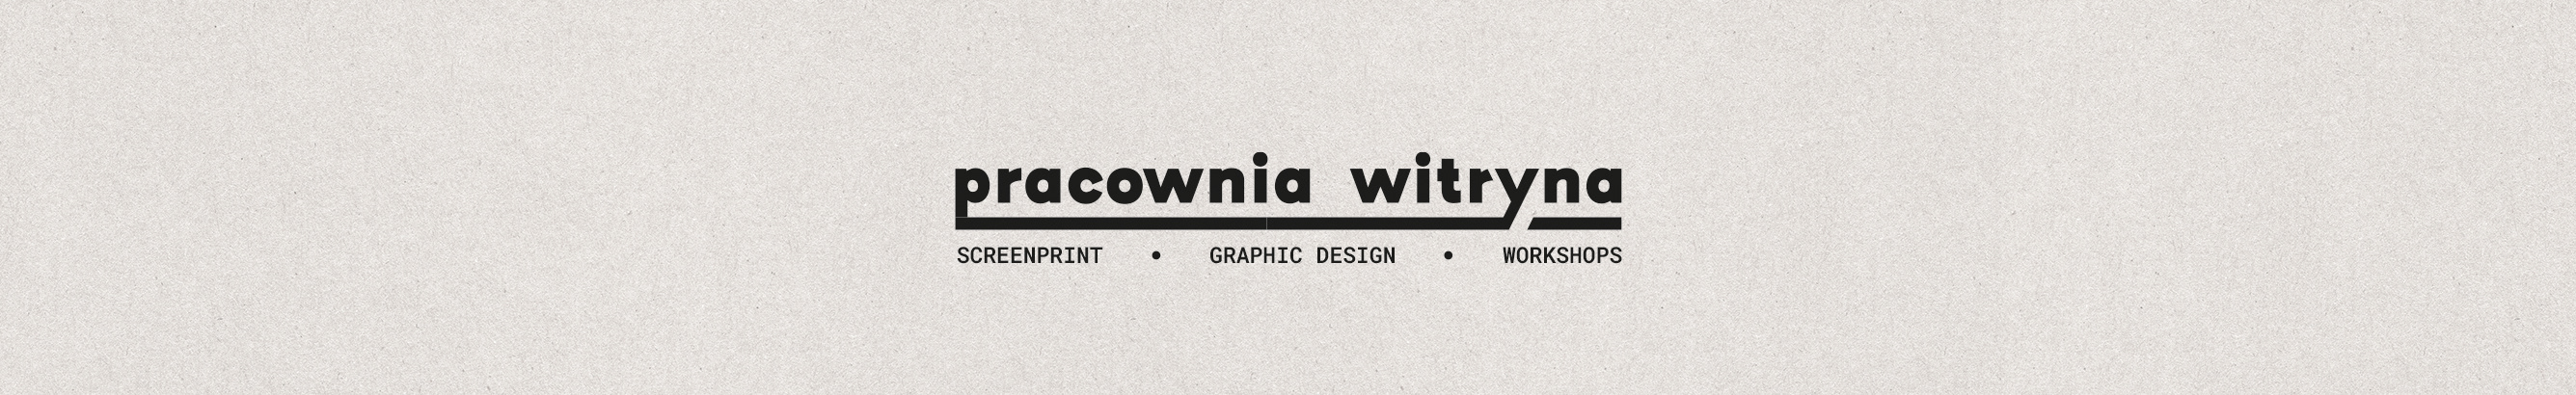 Pracownia Witryna's profile banner